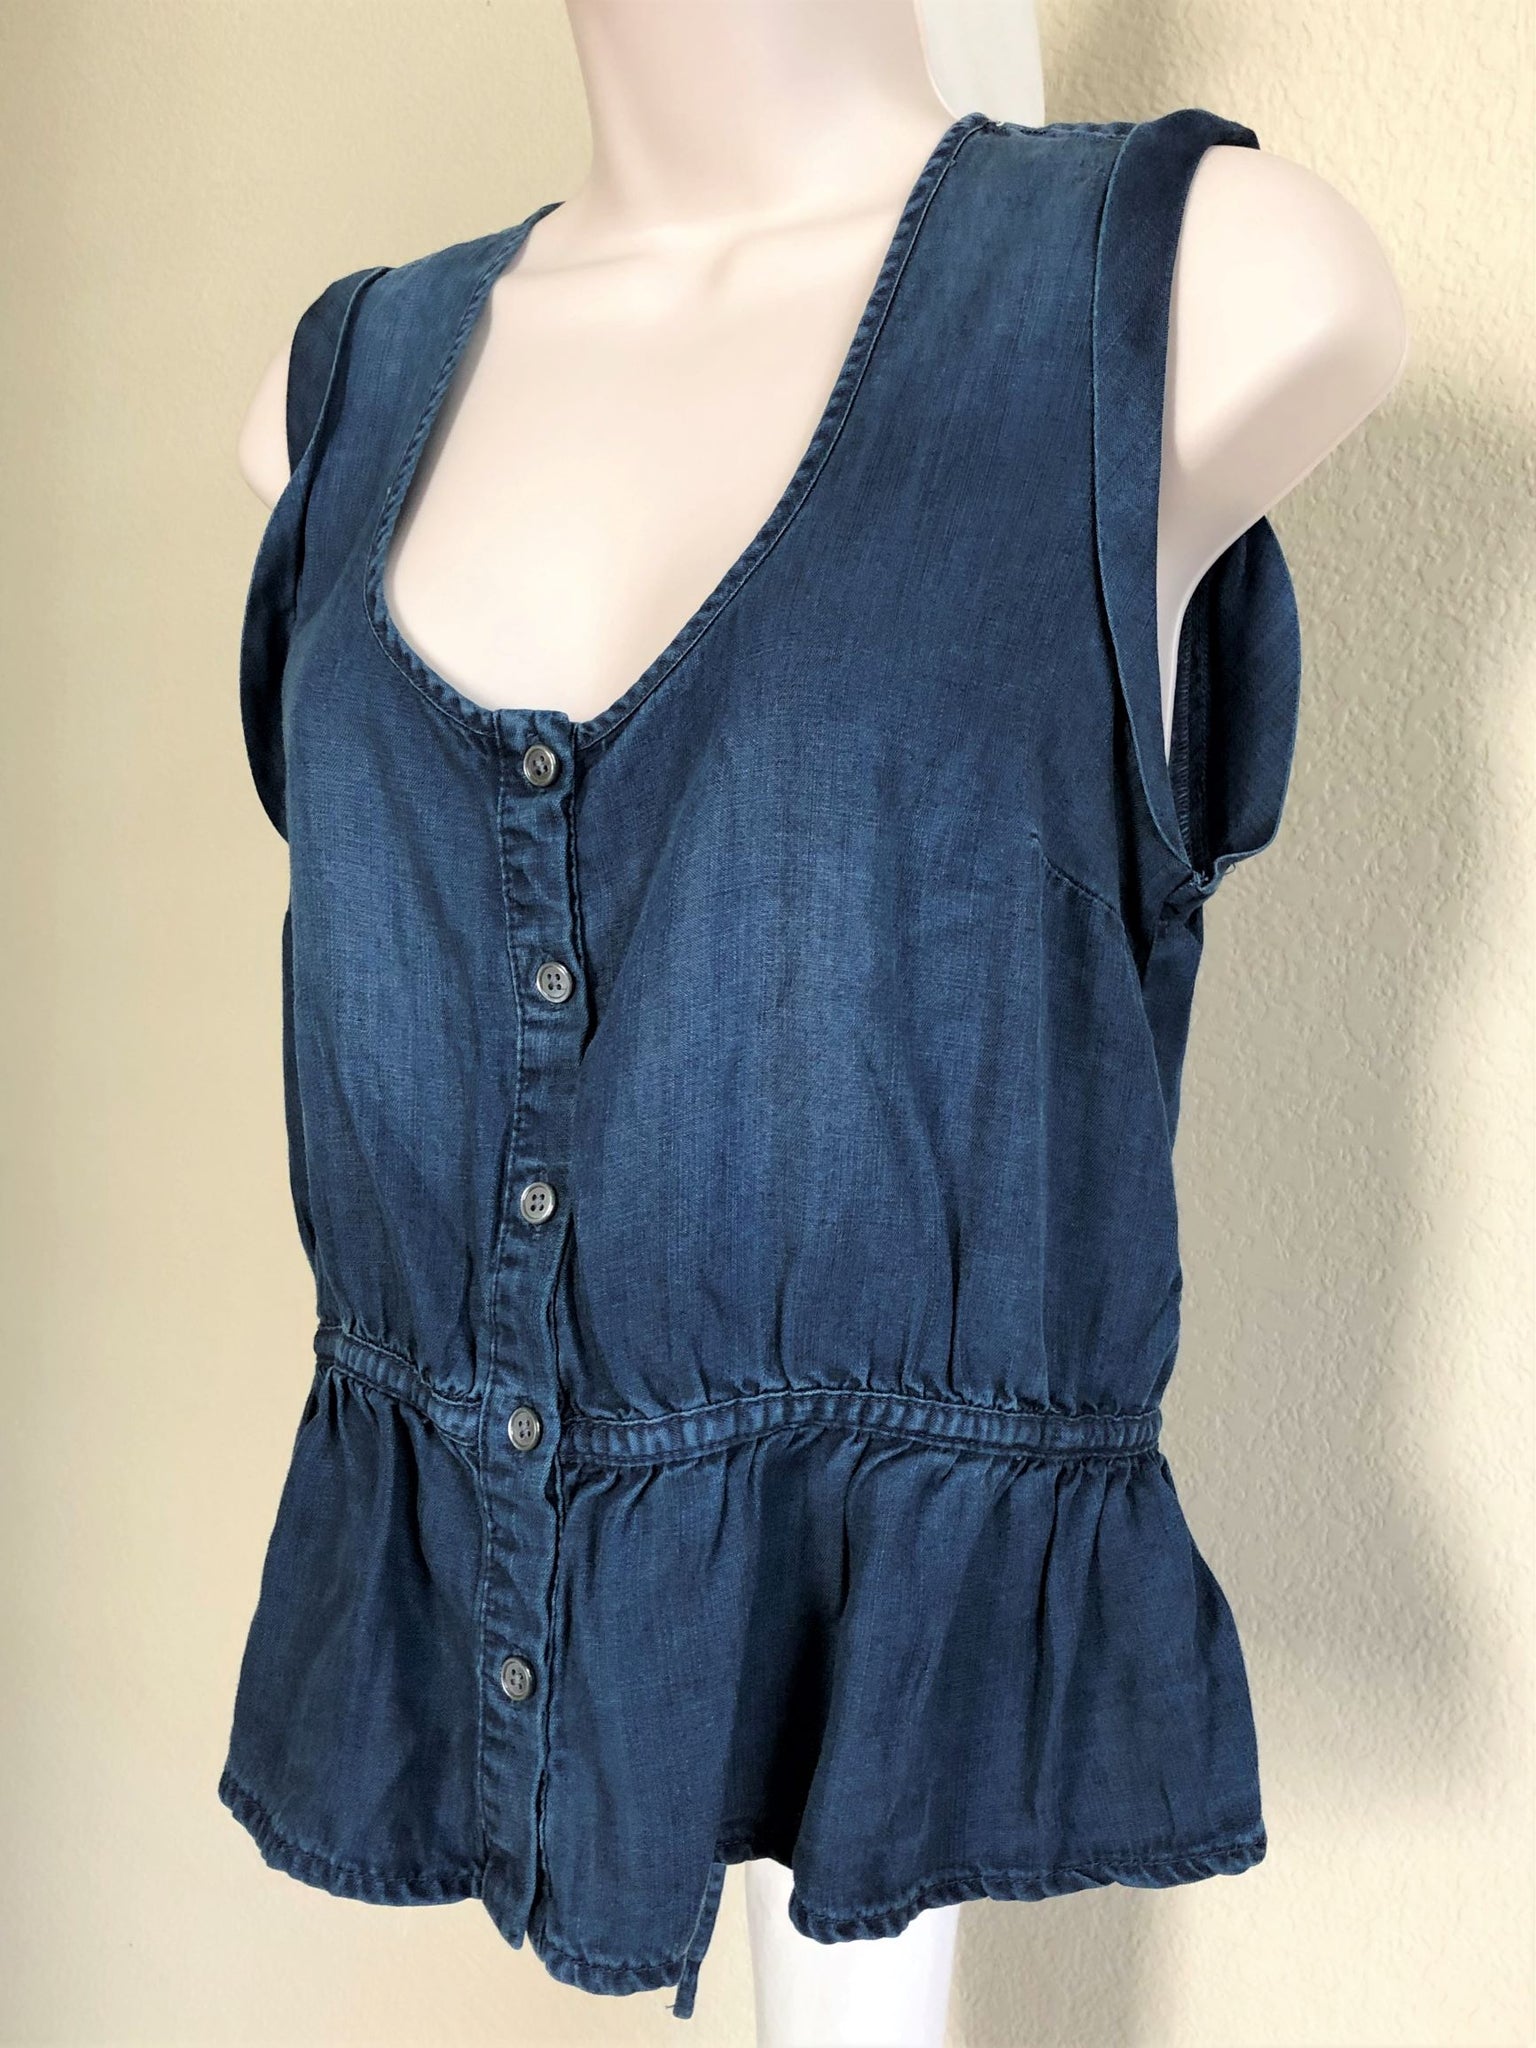 FRAME SMALL James - NEW - Blue Chambray Top